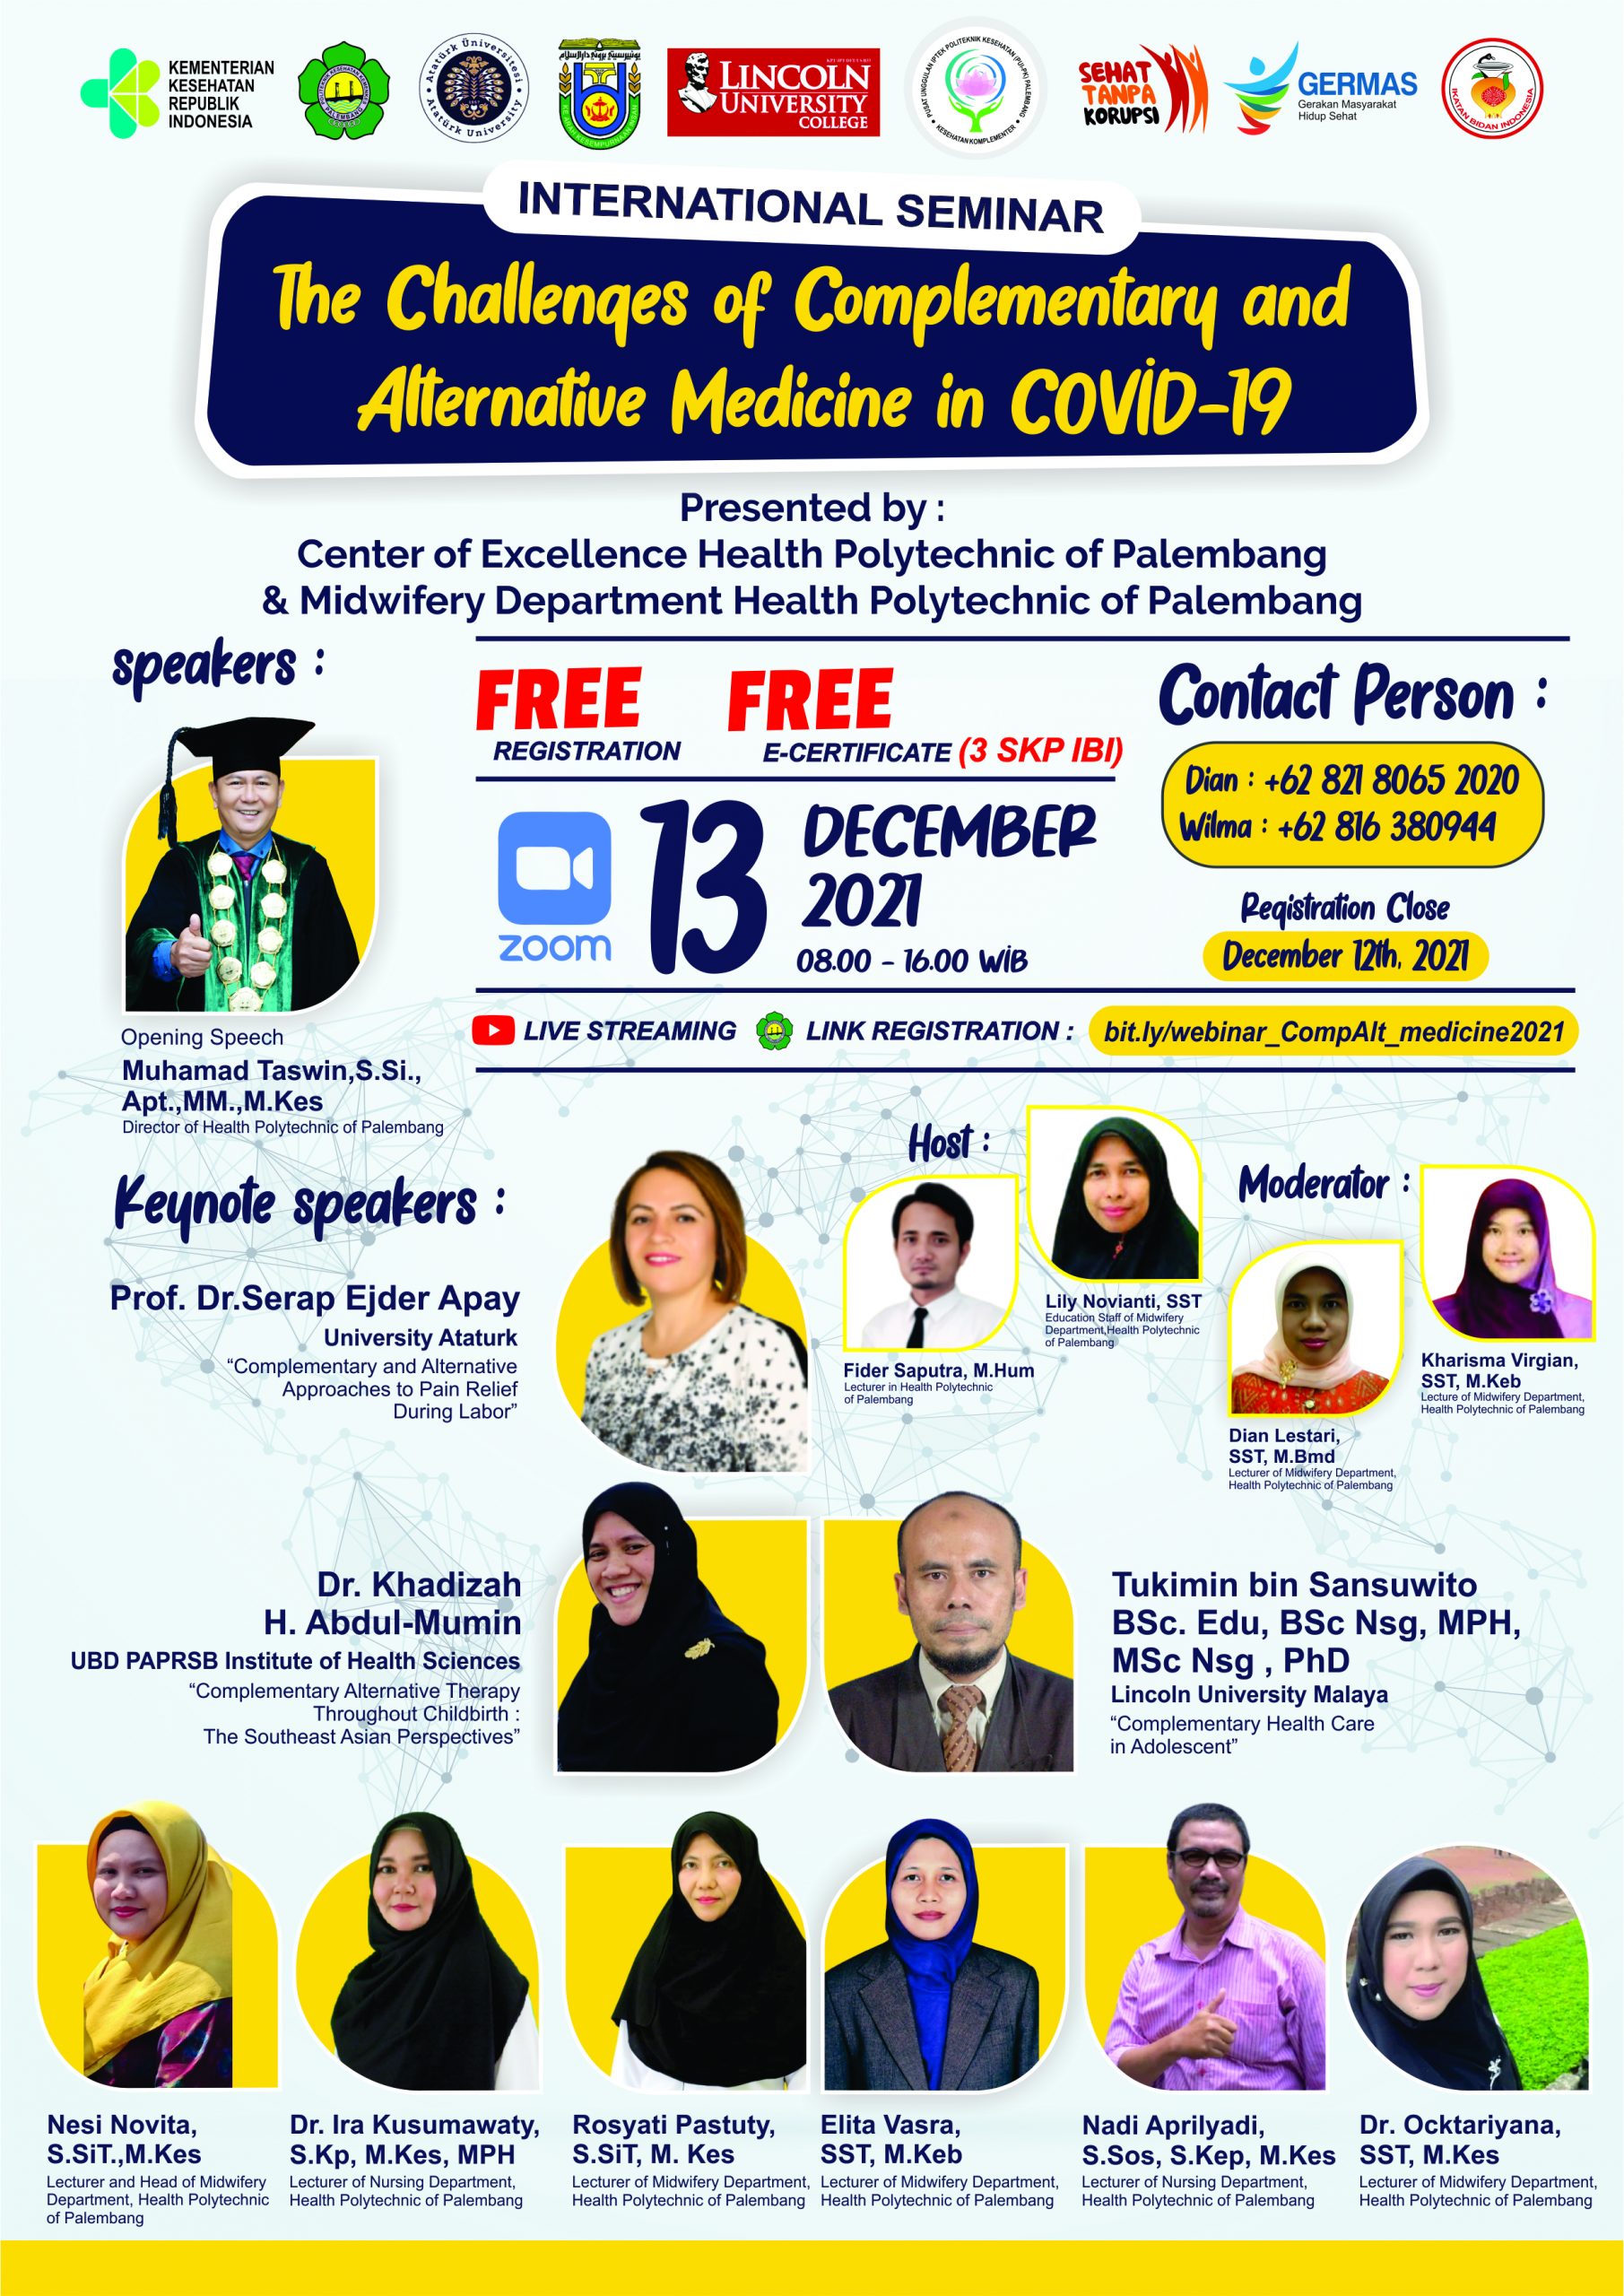 Registration International Seminar The Challenges of Complementary and Alternative Medicine in COVID-19